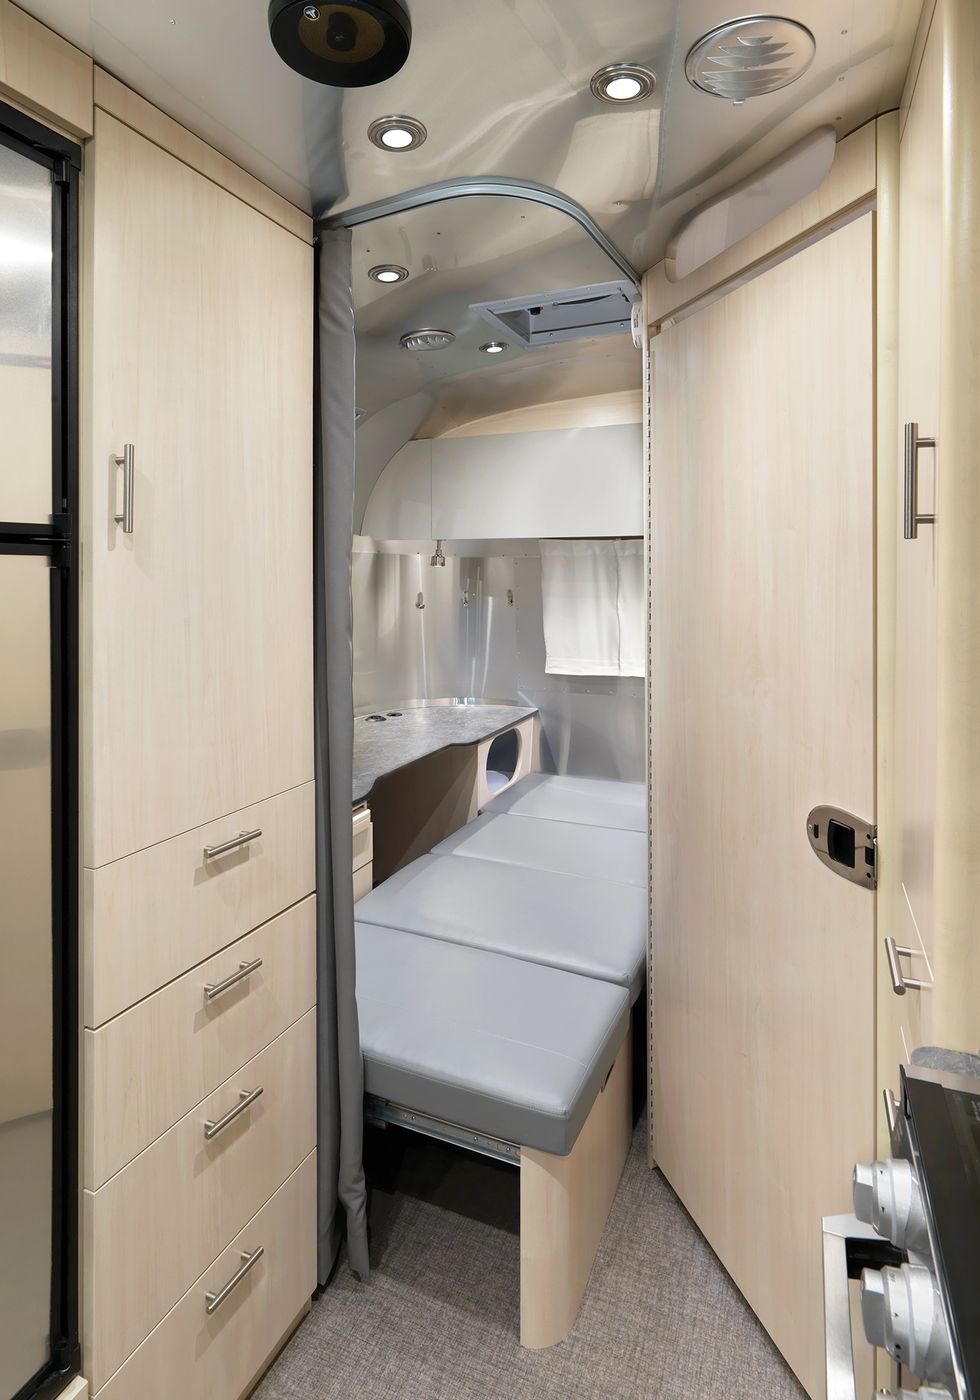 airstream flying cloud 30fb office